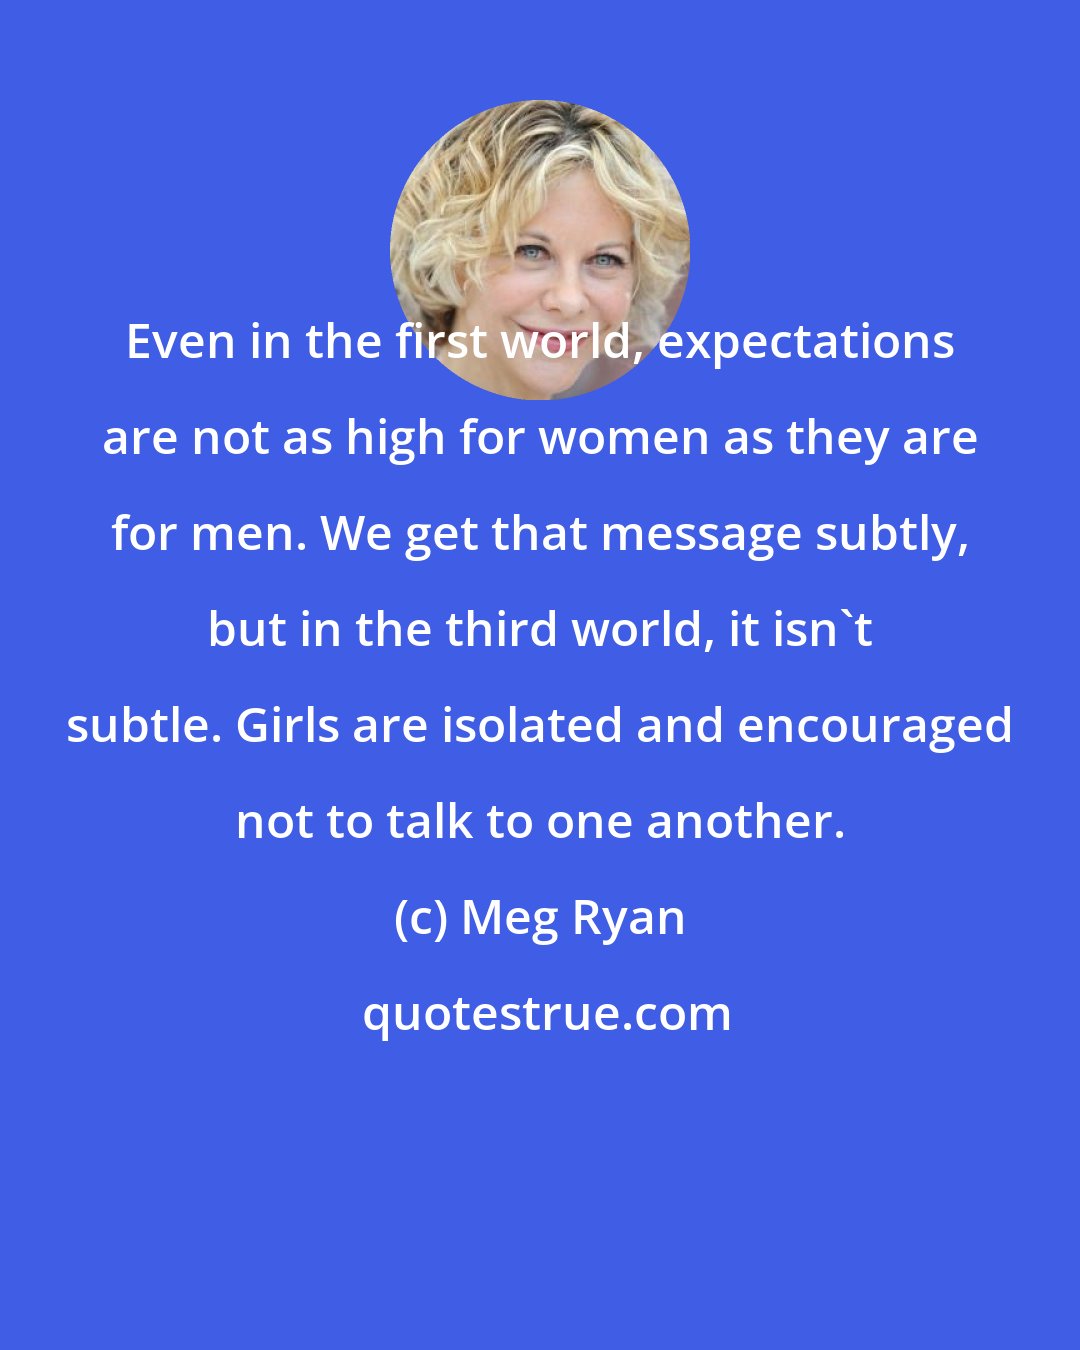 Meg Ryan: Even in the first world, expectations are not as high for women as they are for men. We get that message subtly, but in the third world, it isn't subtle. Girls are isolated and encouraged not to talk to one another.